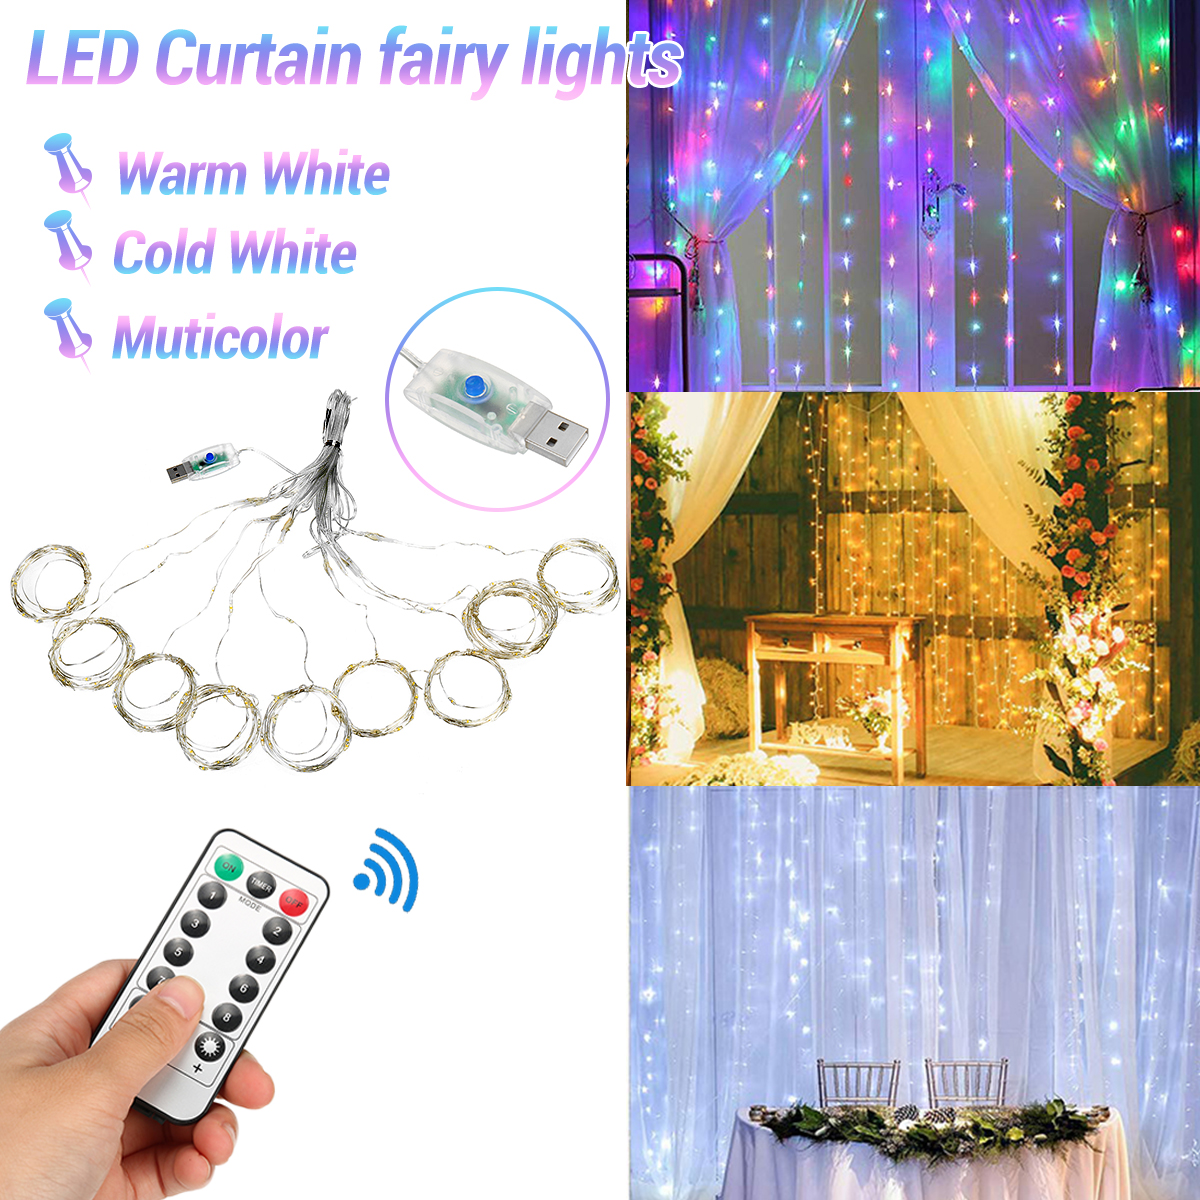 3m2m1m-LED-Curtain-Fairy-Lights-USB-String-Lights-Bedroom-Wedding-Party-Christmas-Tree-Decorations-L-1695518-1